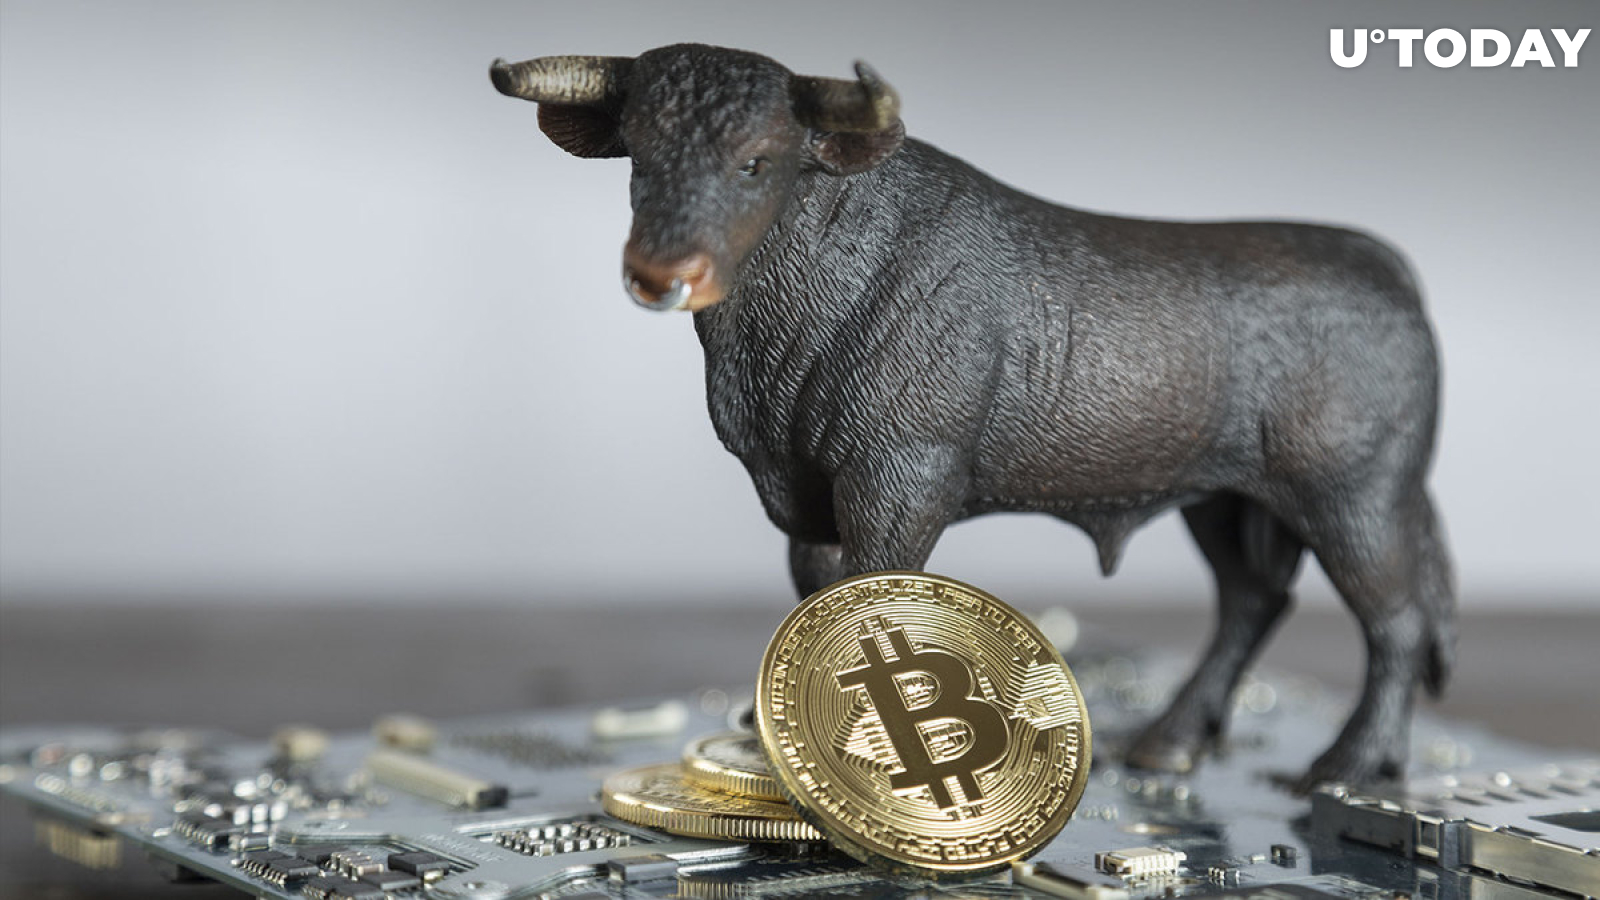 Bitcoin (BTC) Now in Bull Phase, Here's Why: CryptoQuant CEO